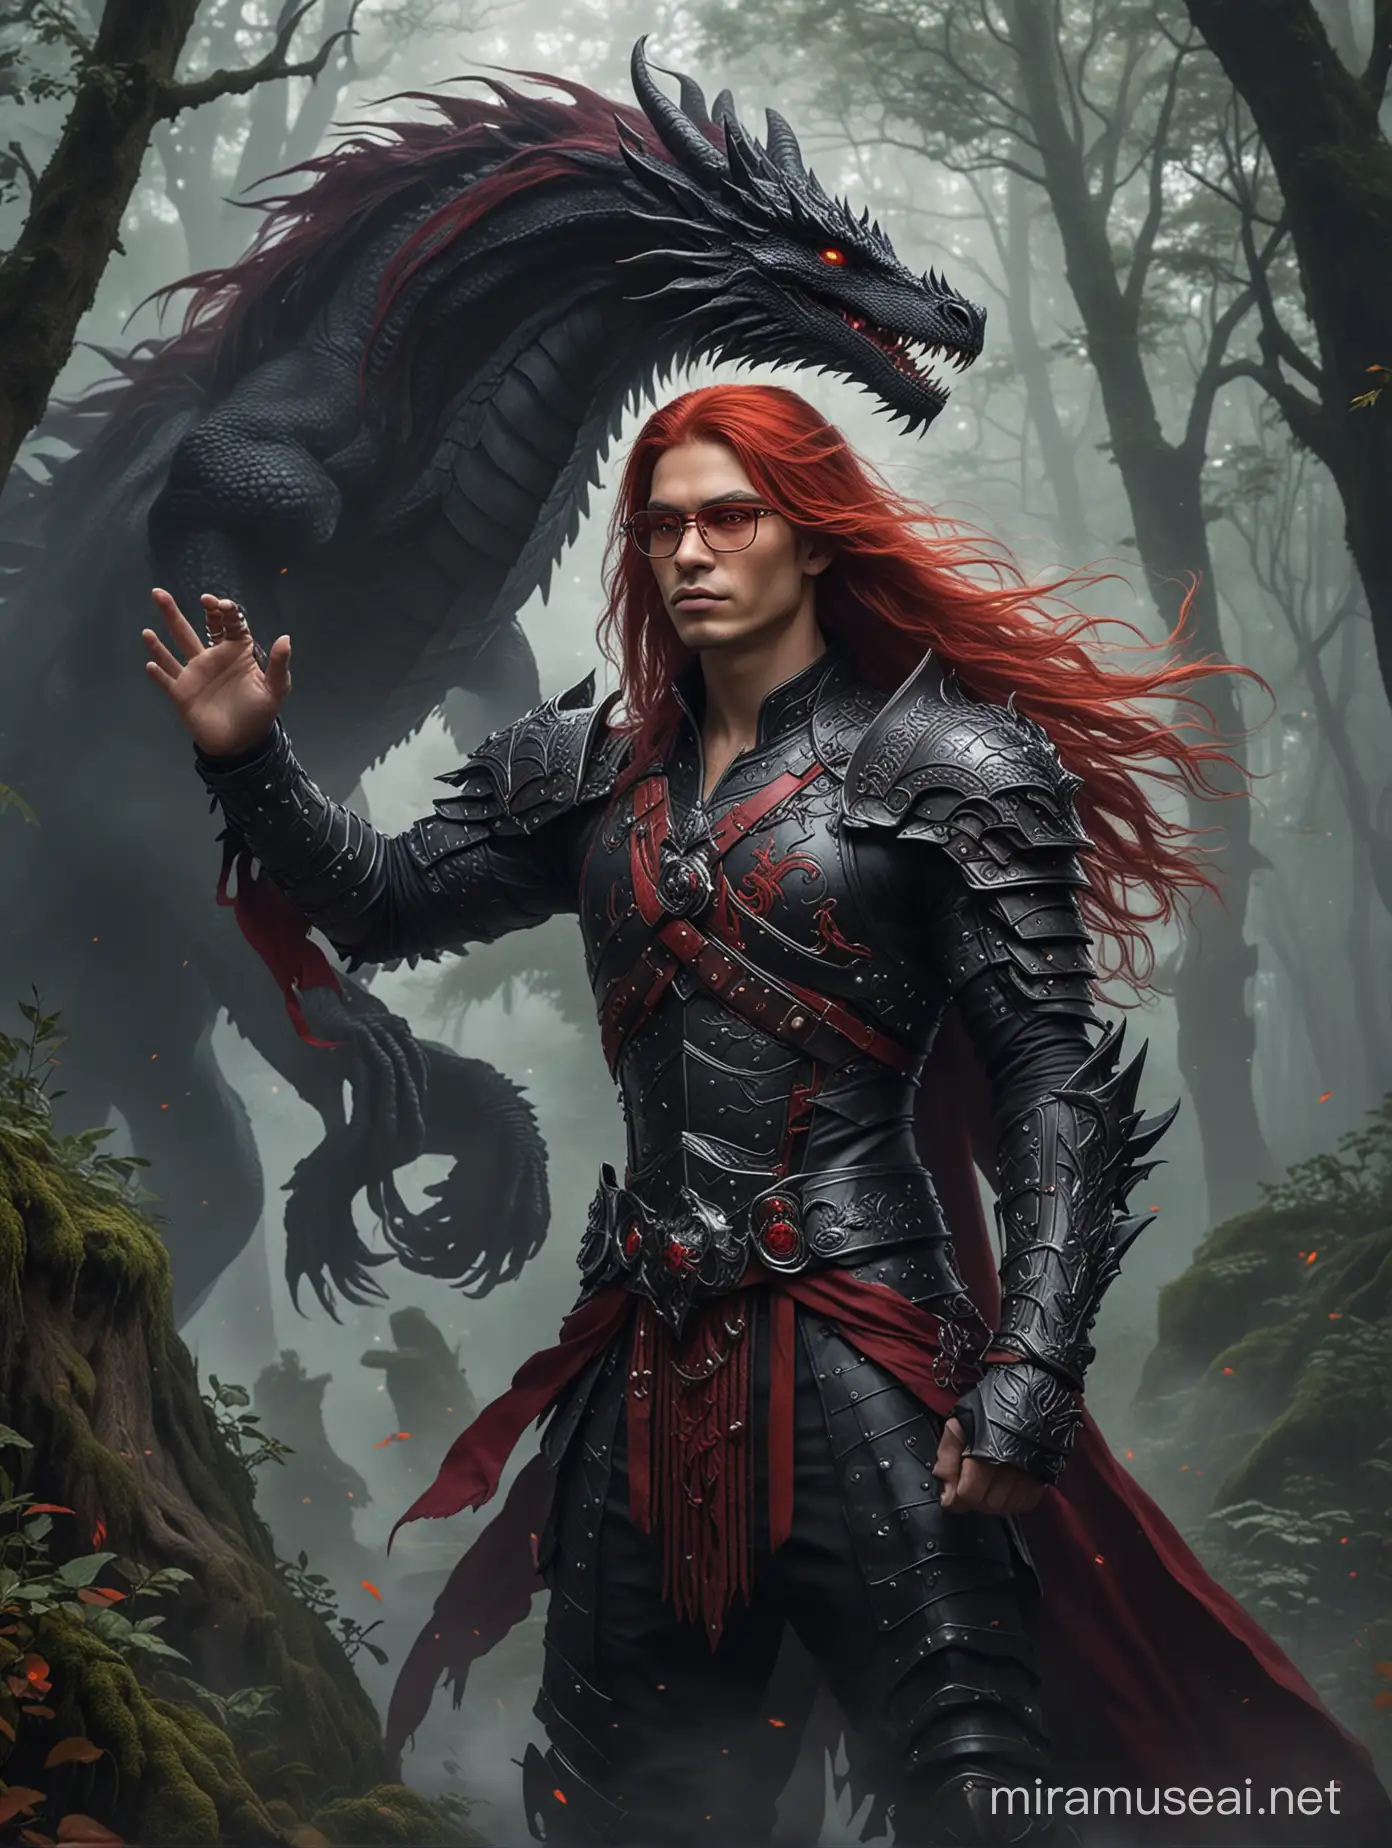 Male Sorcerer Summoning Fiery Dragon in Enchanted Forest